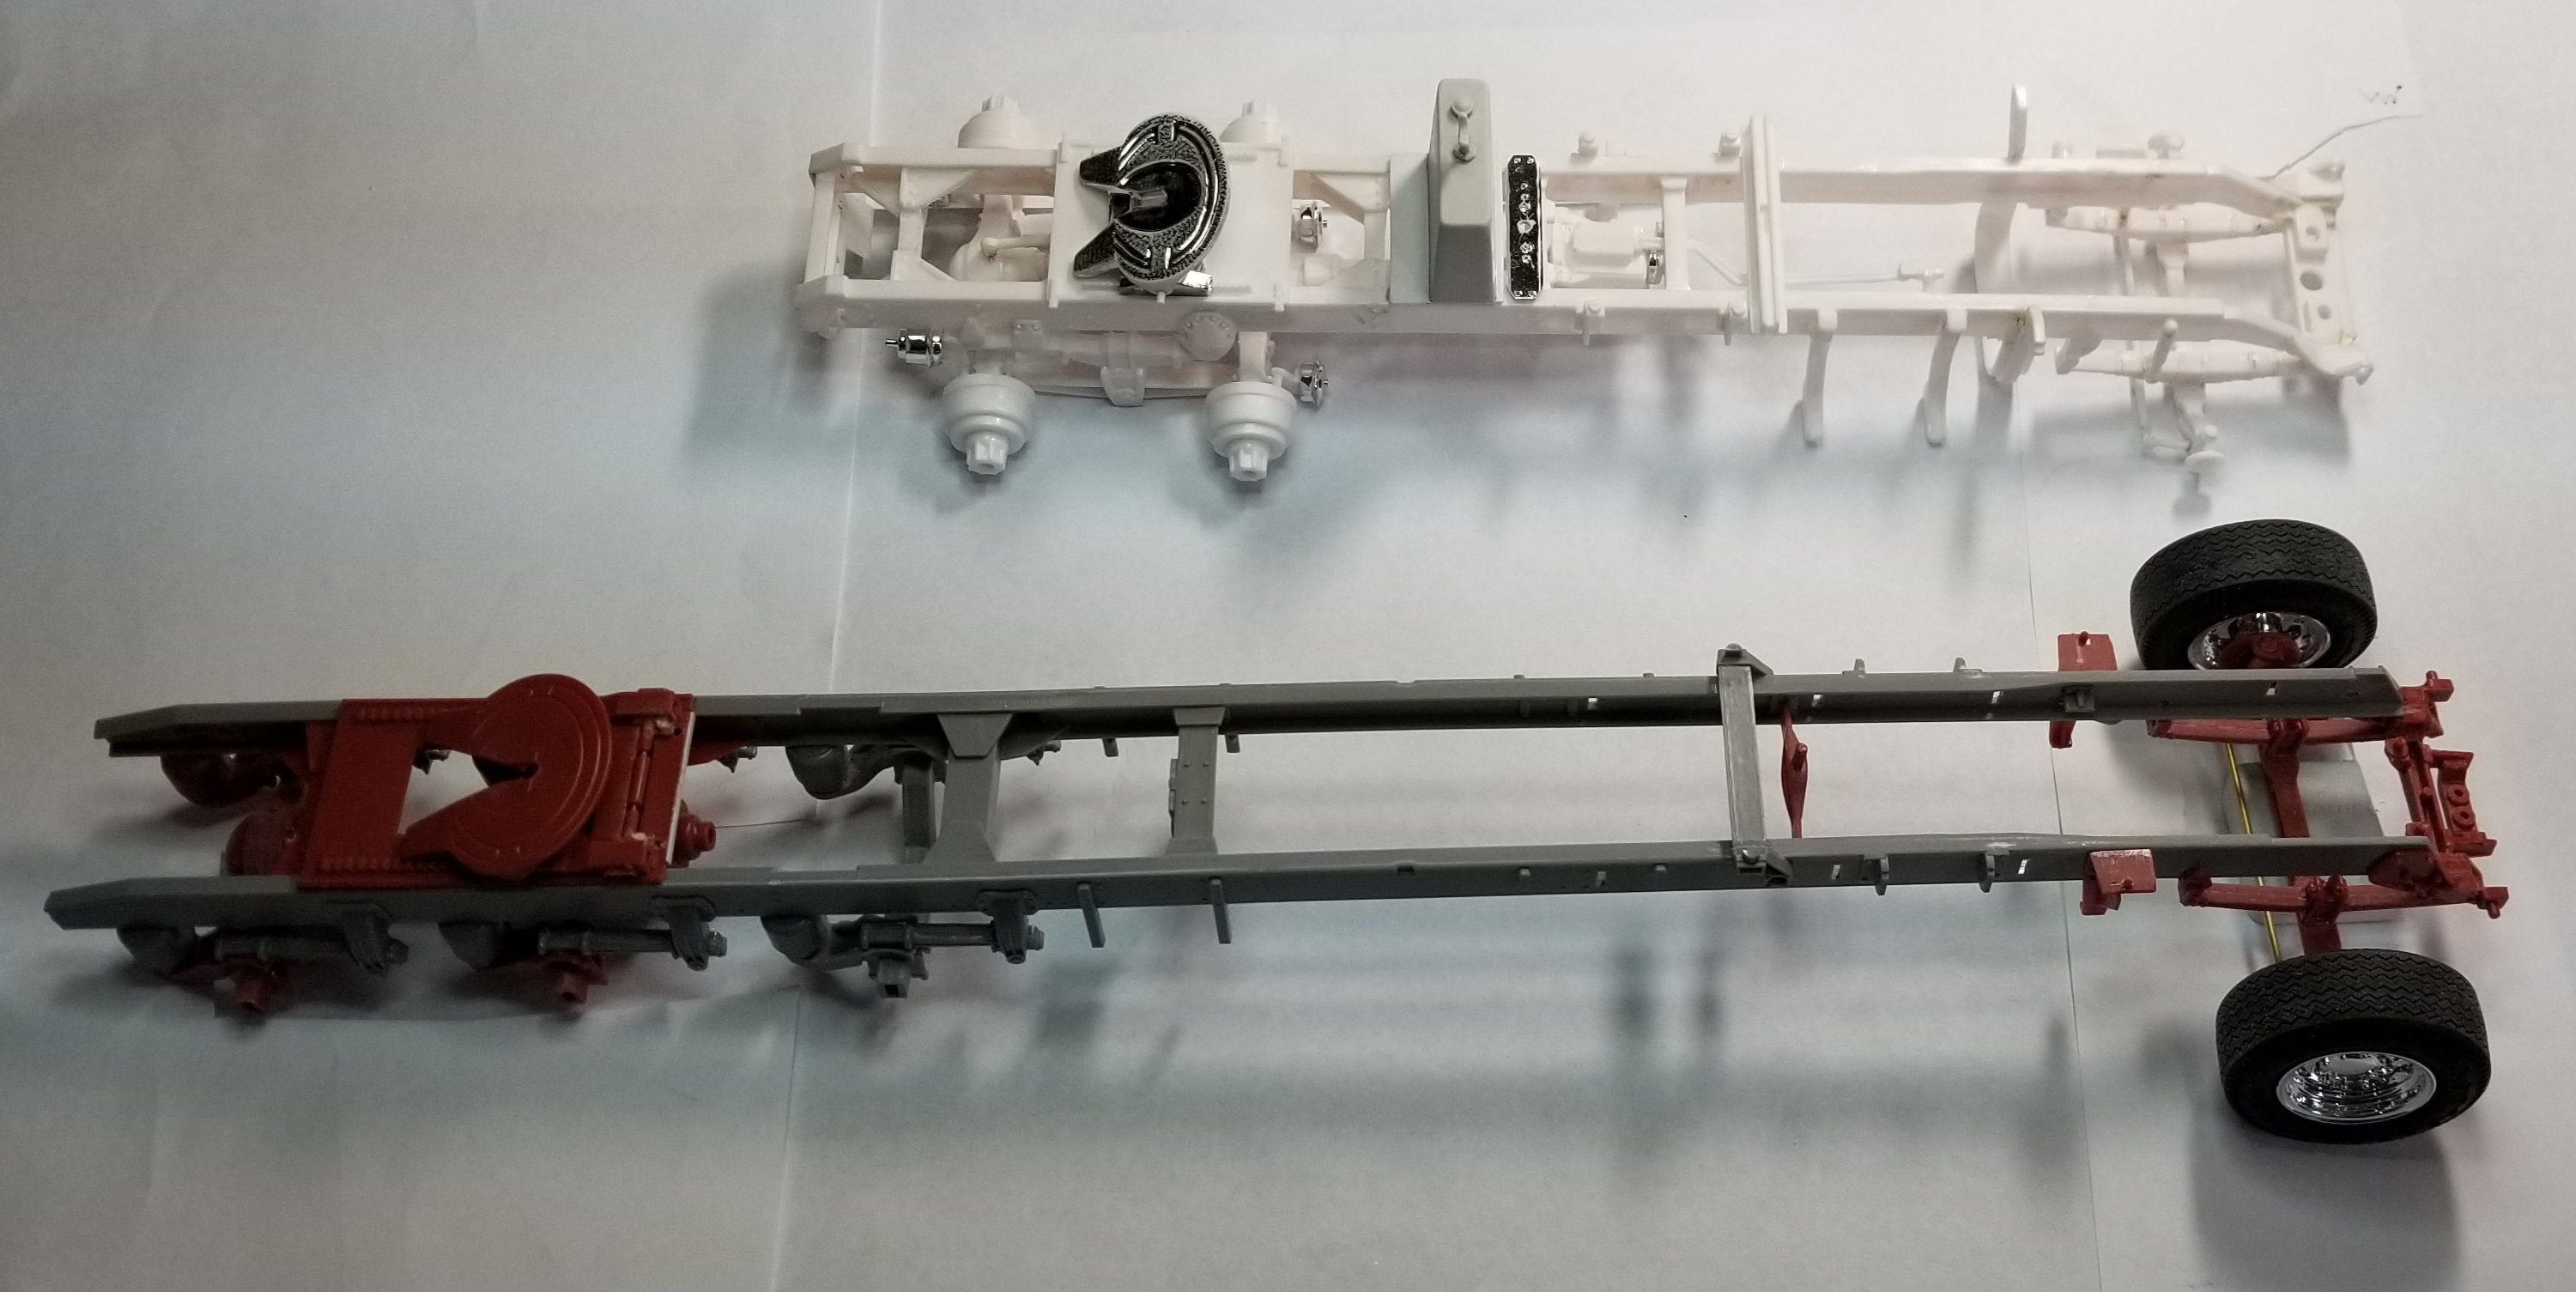 1/25 AMT Metal Axles replace those missing axles in your AMT truck or trailer 